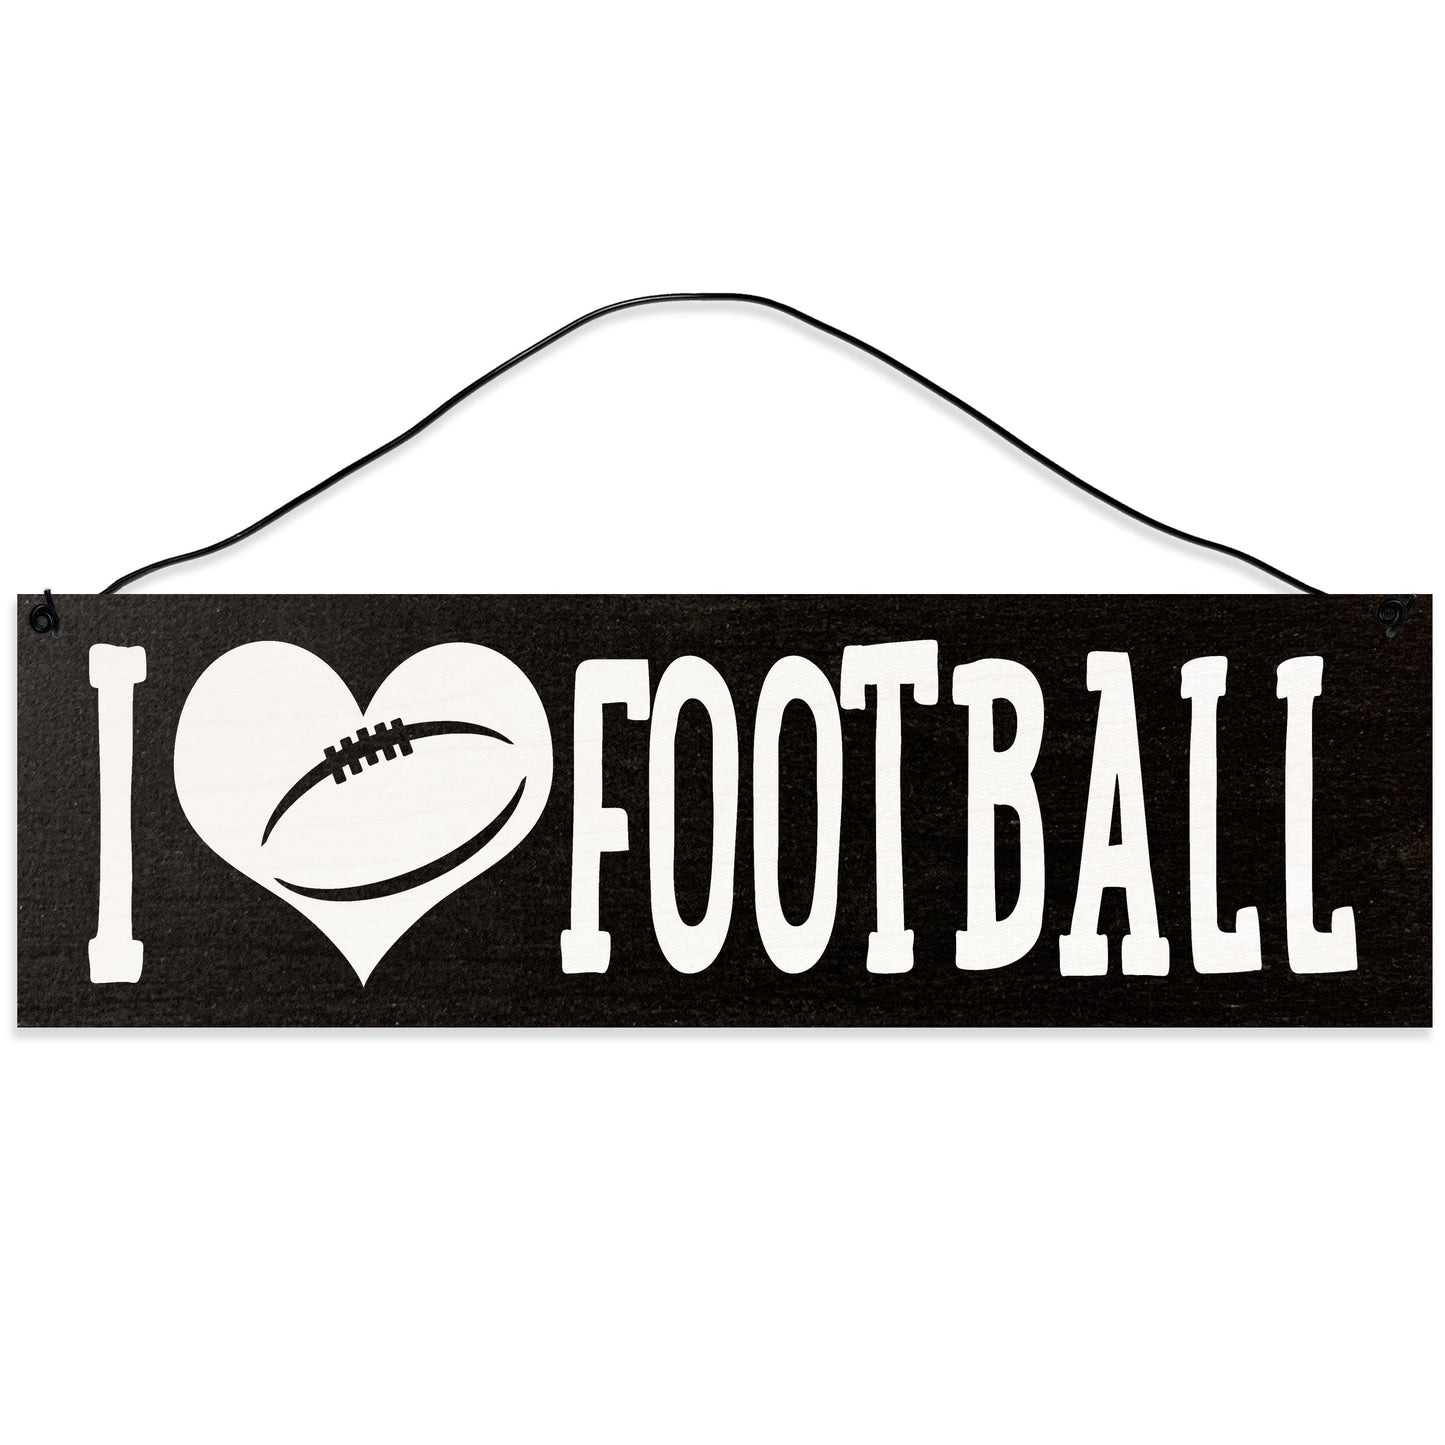 Sawyer's Mill - I Love Football. Wood Sign for Home or Office. Measures 3x10 inches.